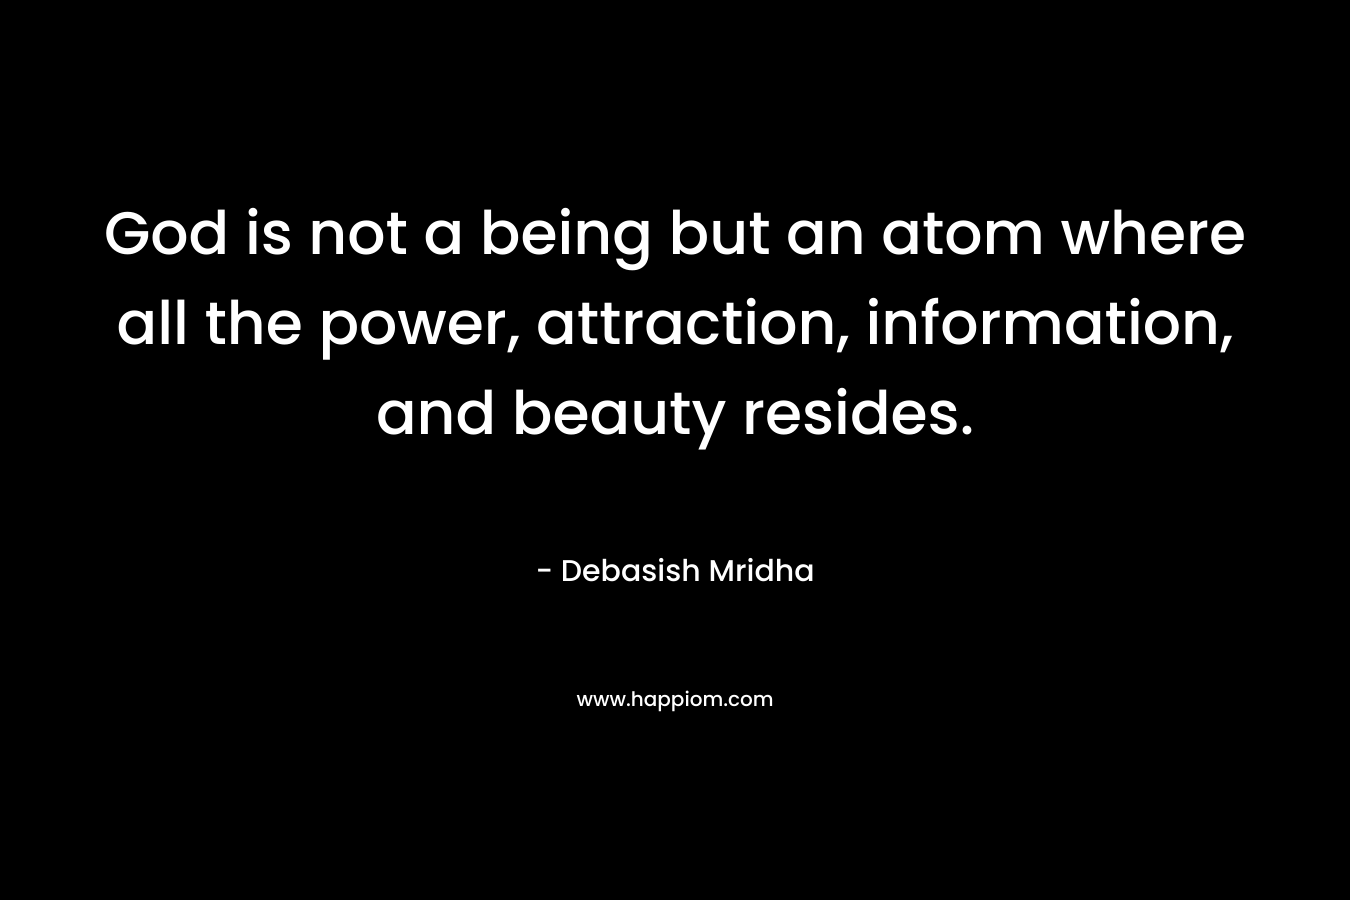 God is not a being but an atom where all the power, attraction, information, and beauty resides. – Debasish Mridha